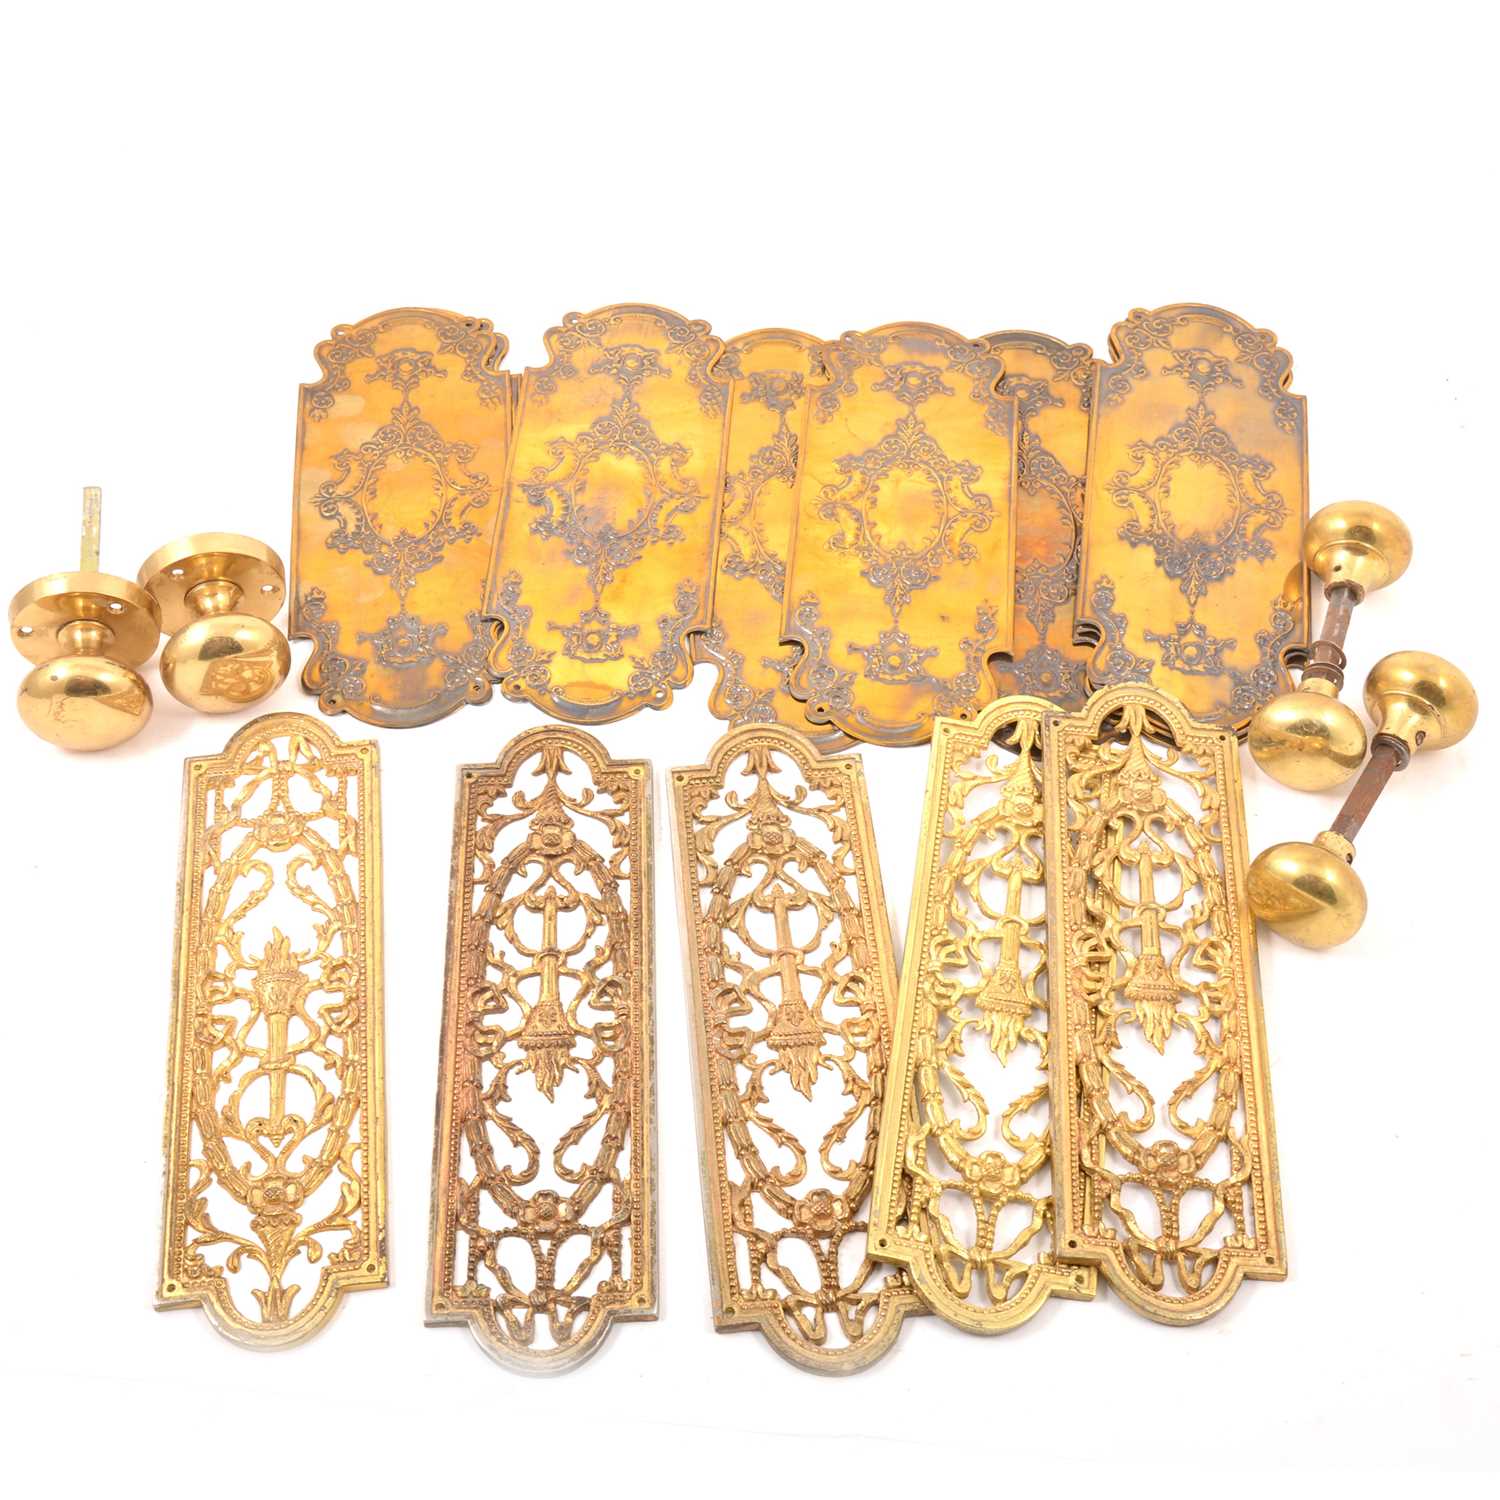 Lot 164 - A collection of door knobs, push plates, handles, plus drops for a small chandelier